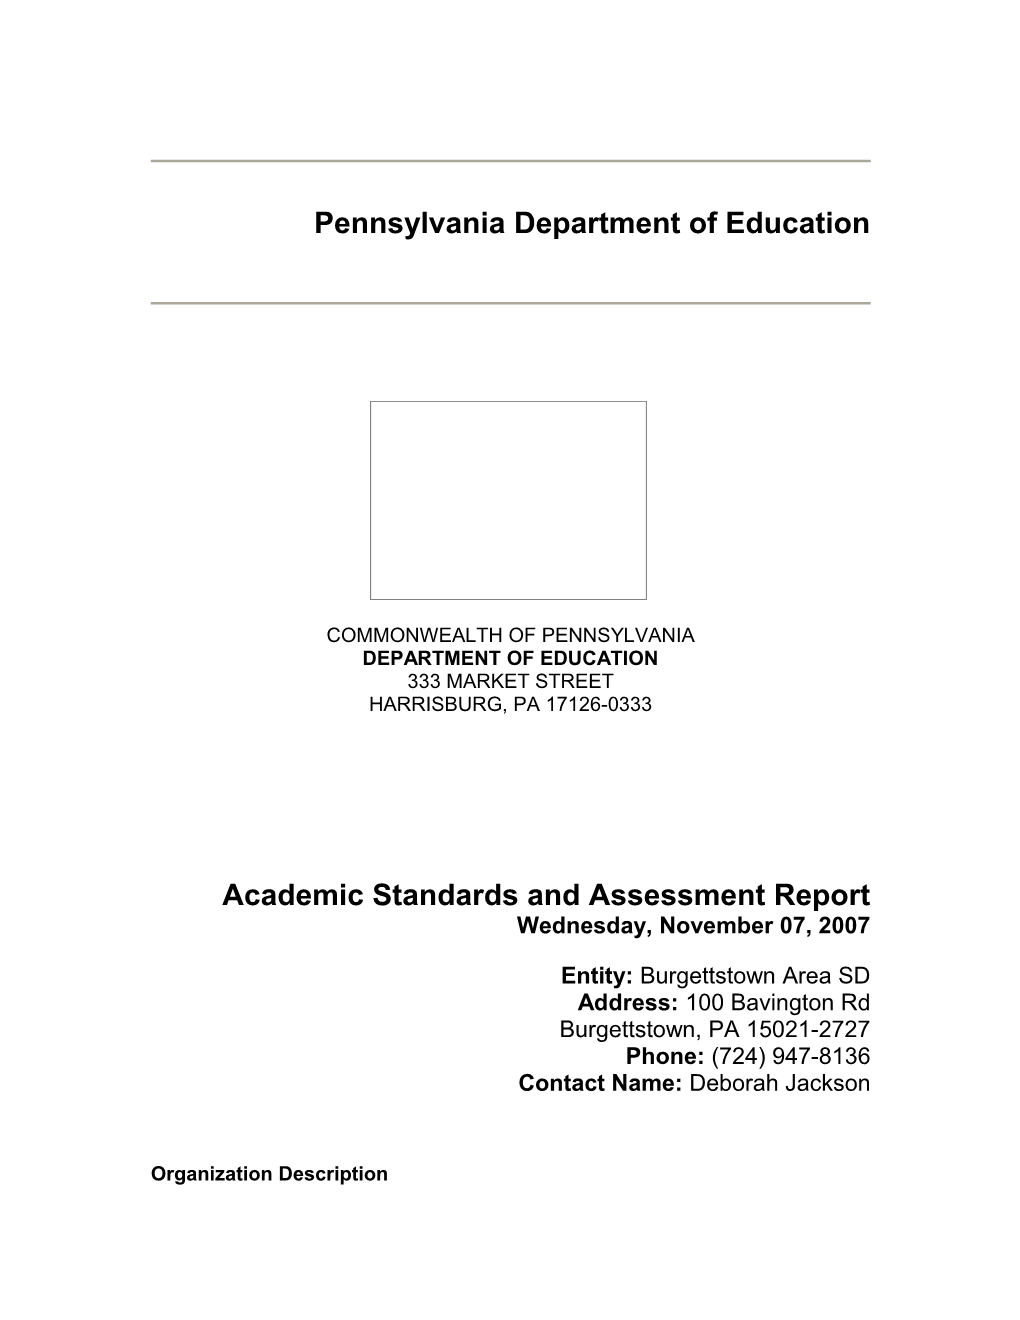 Academic Standards and Assessment Report